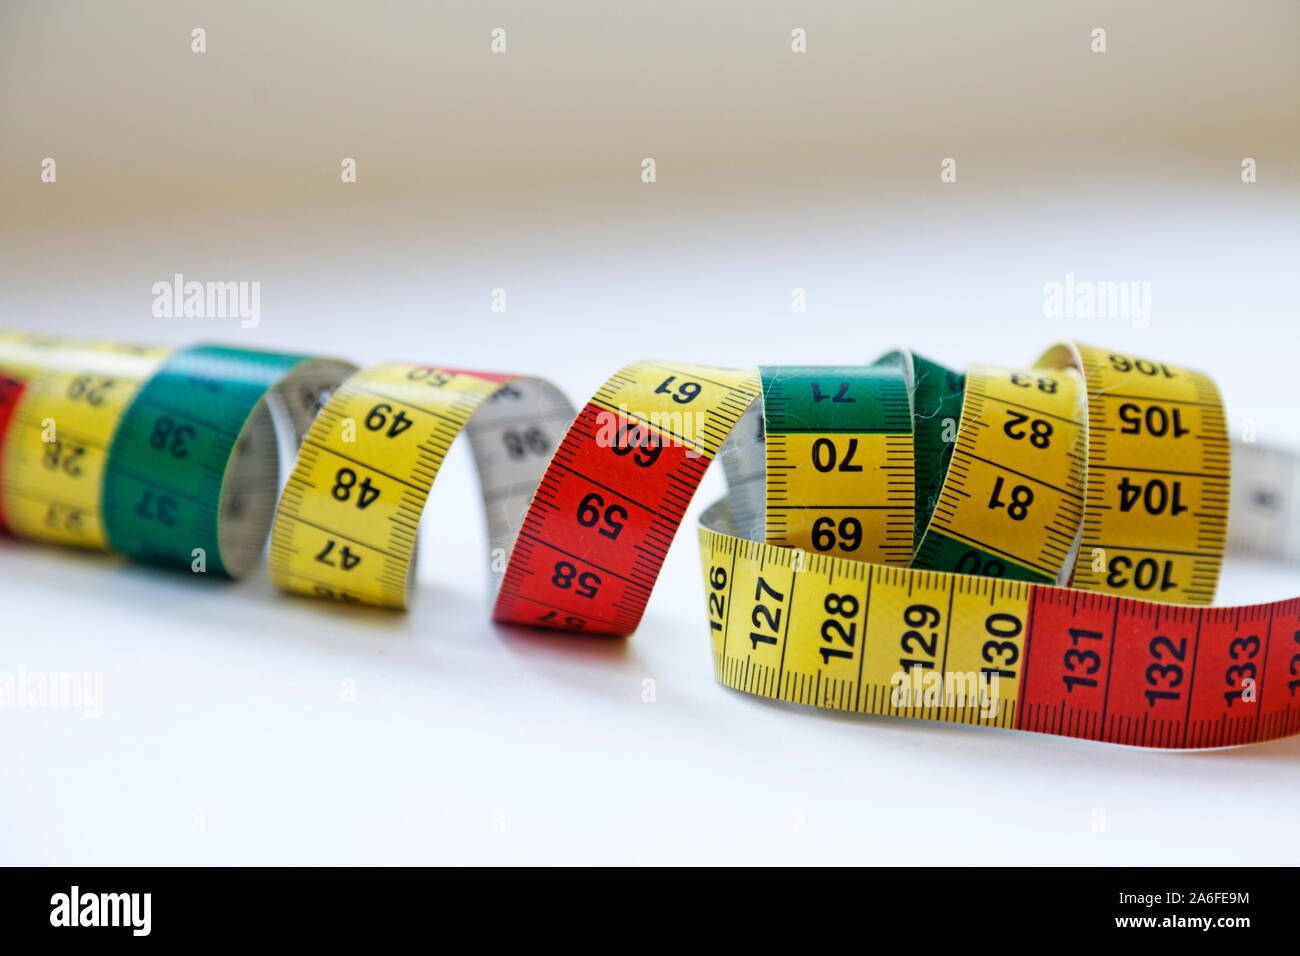 https://c8.alamy.com/comp/2A6FE9M/a-tape-measure-in-different-colors-that-you-use-when-sewing-clothes-2A6FE9M.jpg